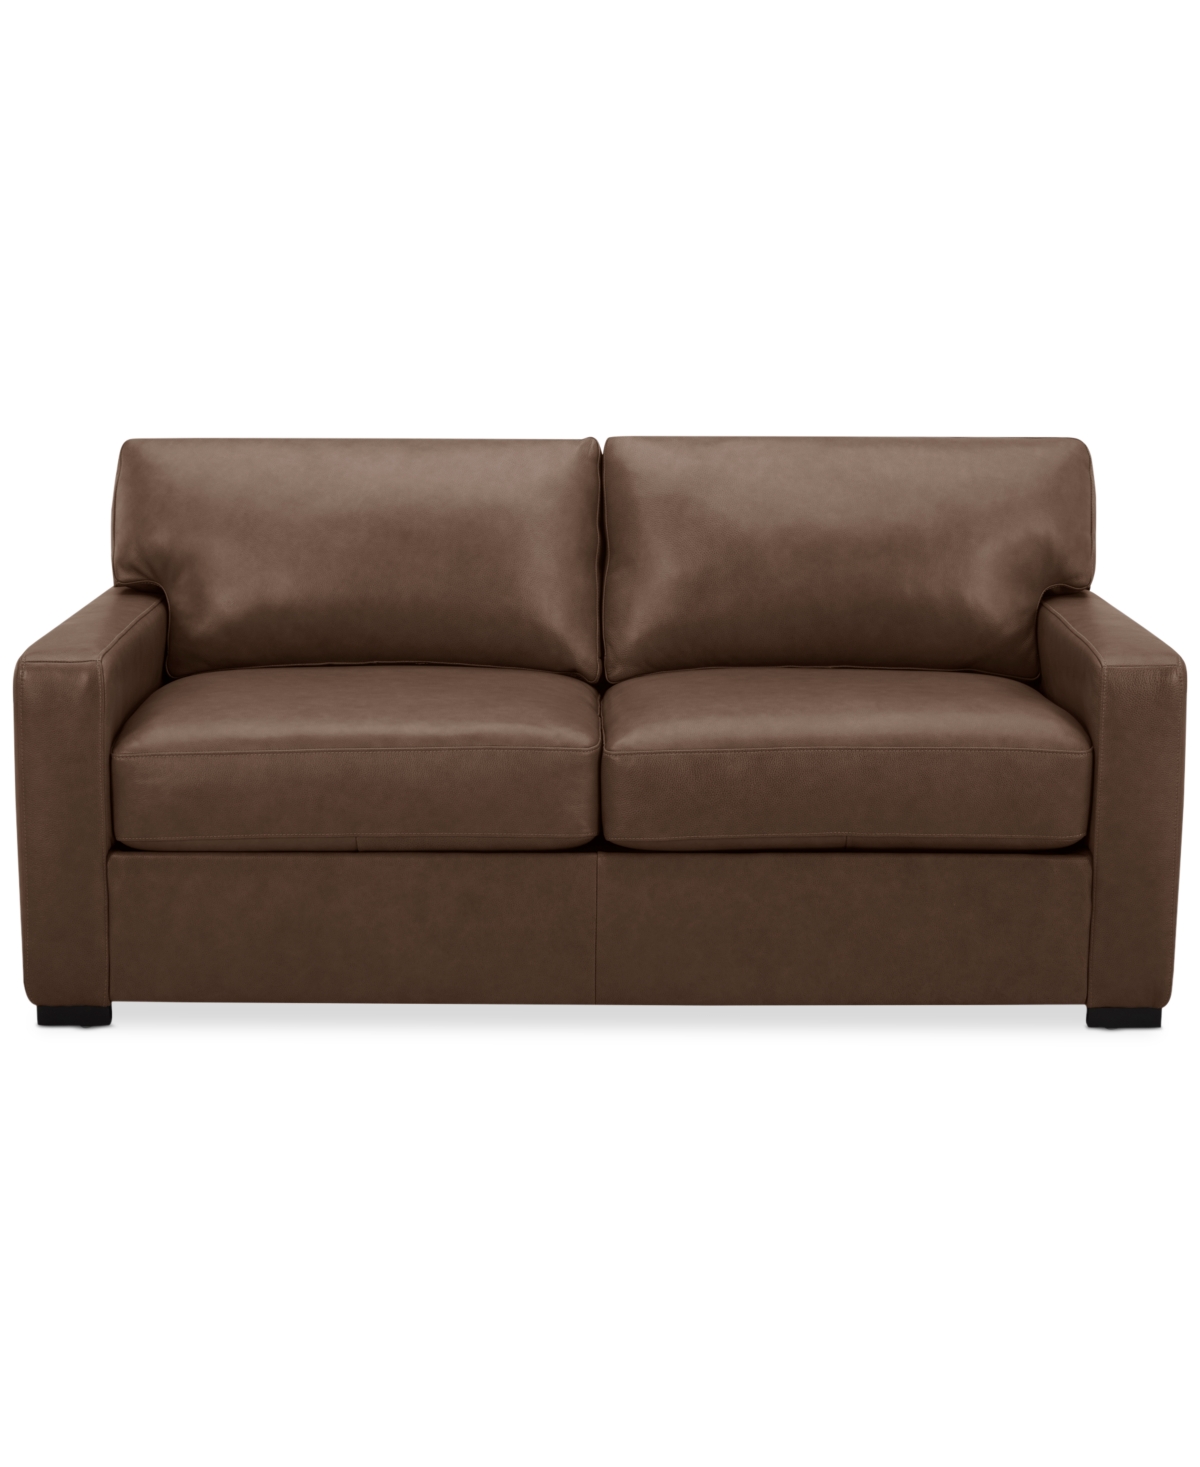 Macy's Radley 74" Leather Apartment Sofa, Created For  In Light Natural